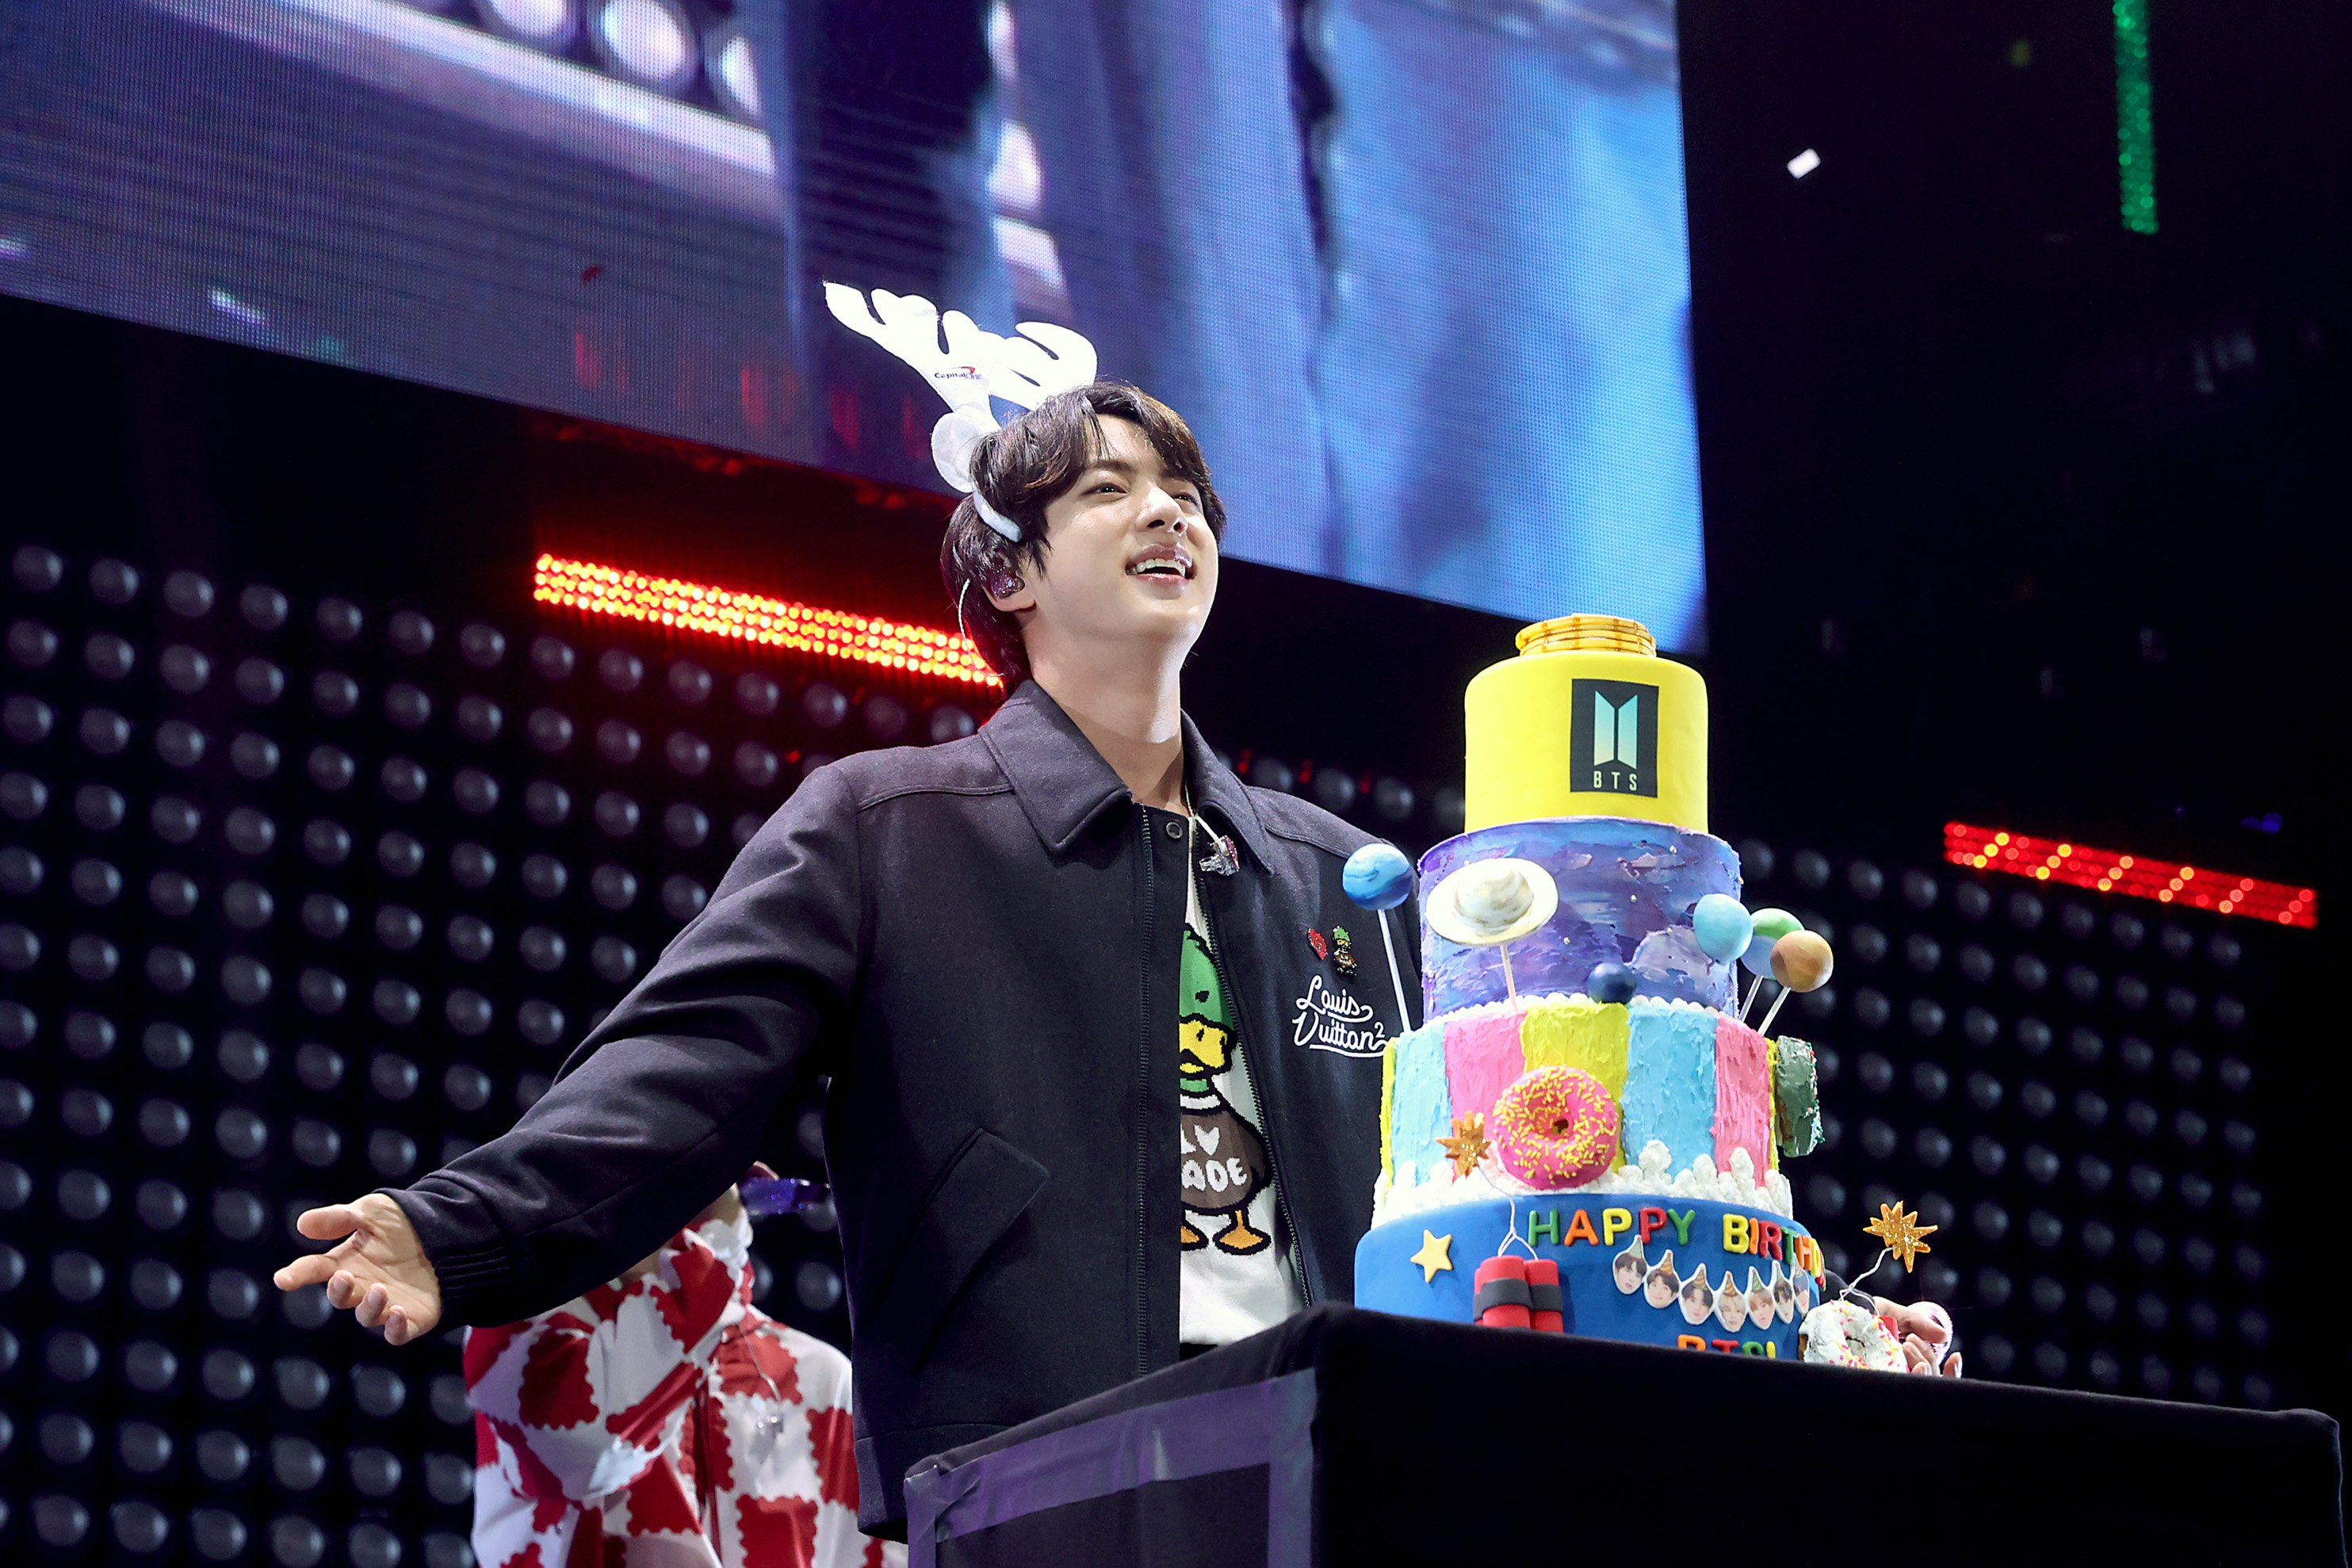 BTS sings 'Happy Birthday' to Jin on stage during iHeartRadio 102.7 KIIS FM's Jingle Ball 2021